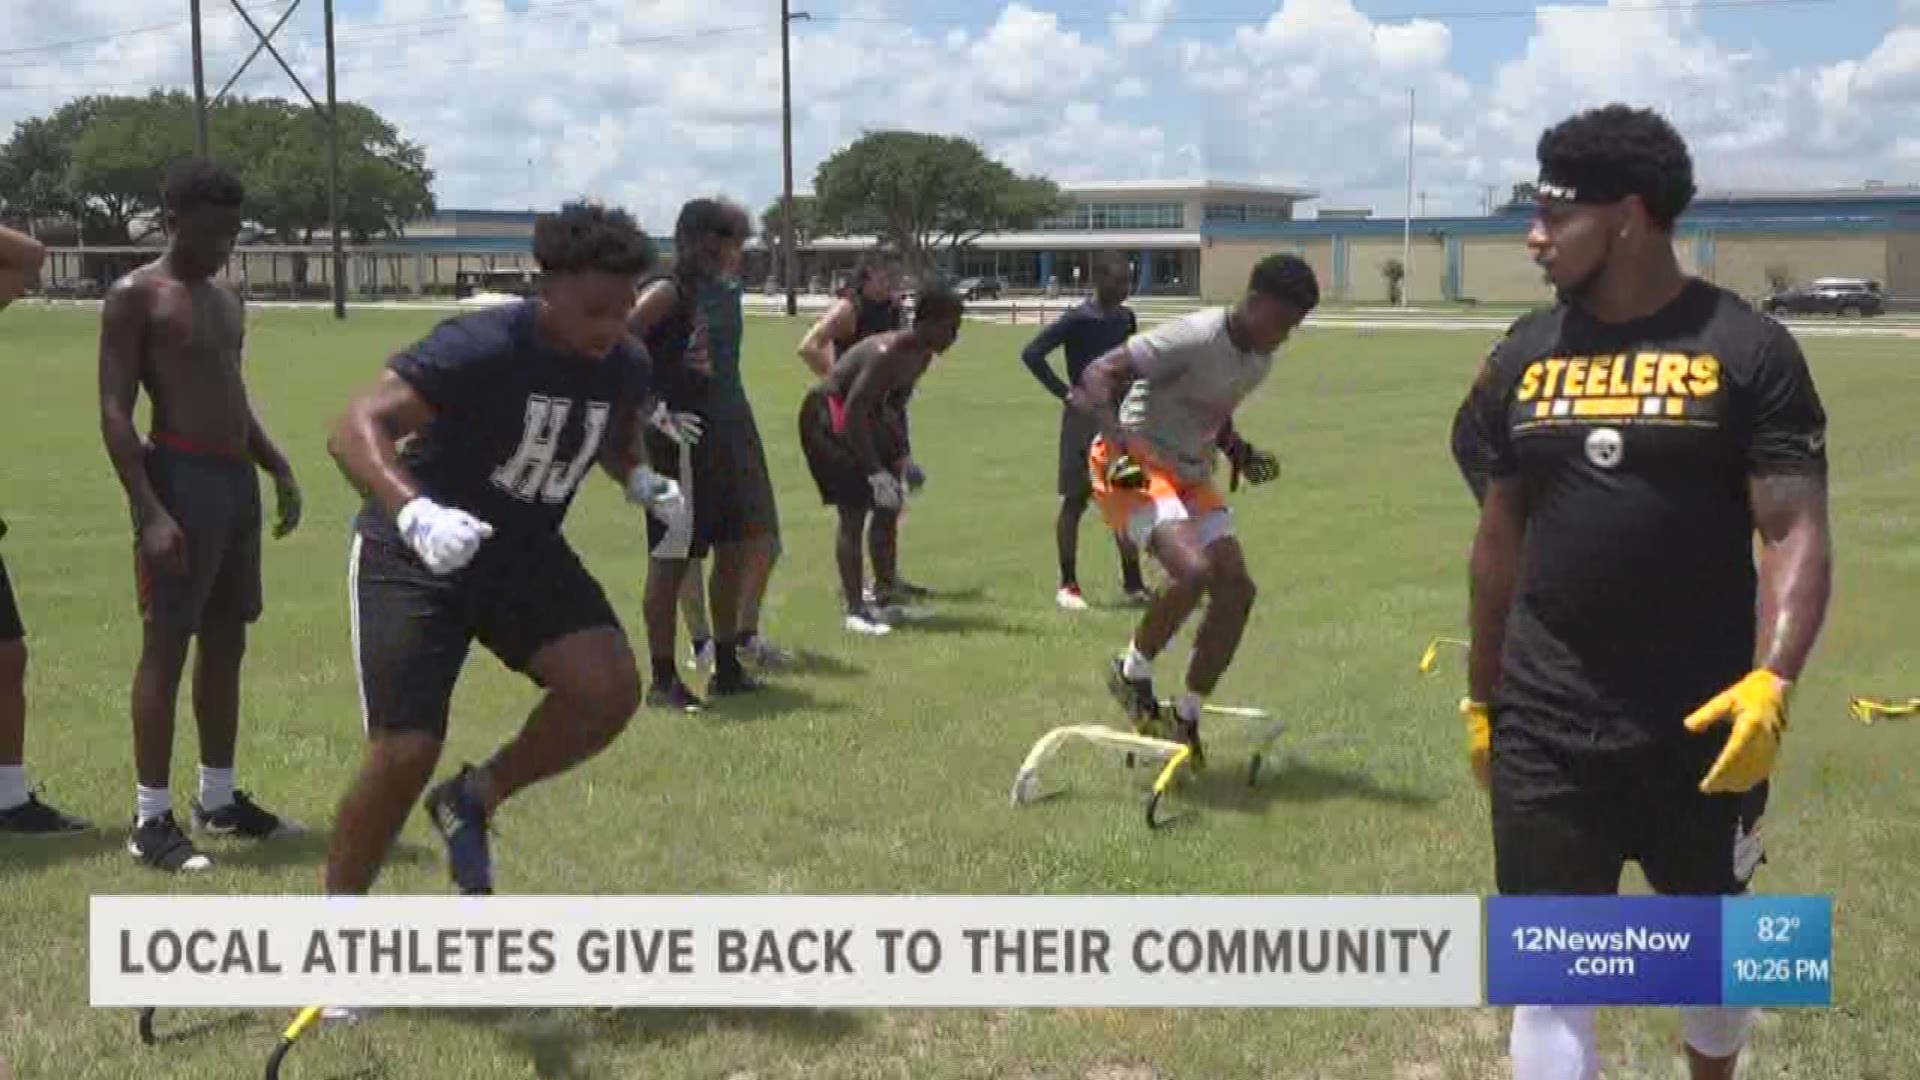 P.J. Locke III (Pittsburgh Steelers) and Rodney Randle Jr (San Diego Chargers) invited local athletes to join them for a workout session